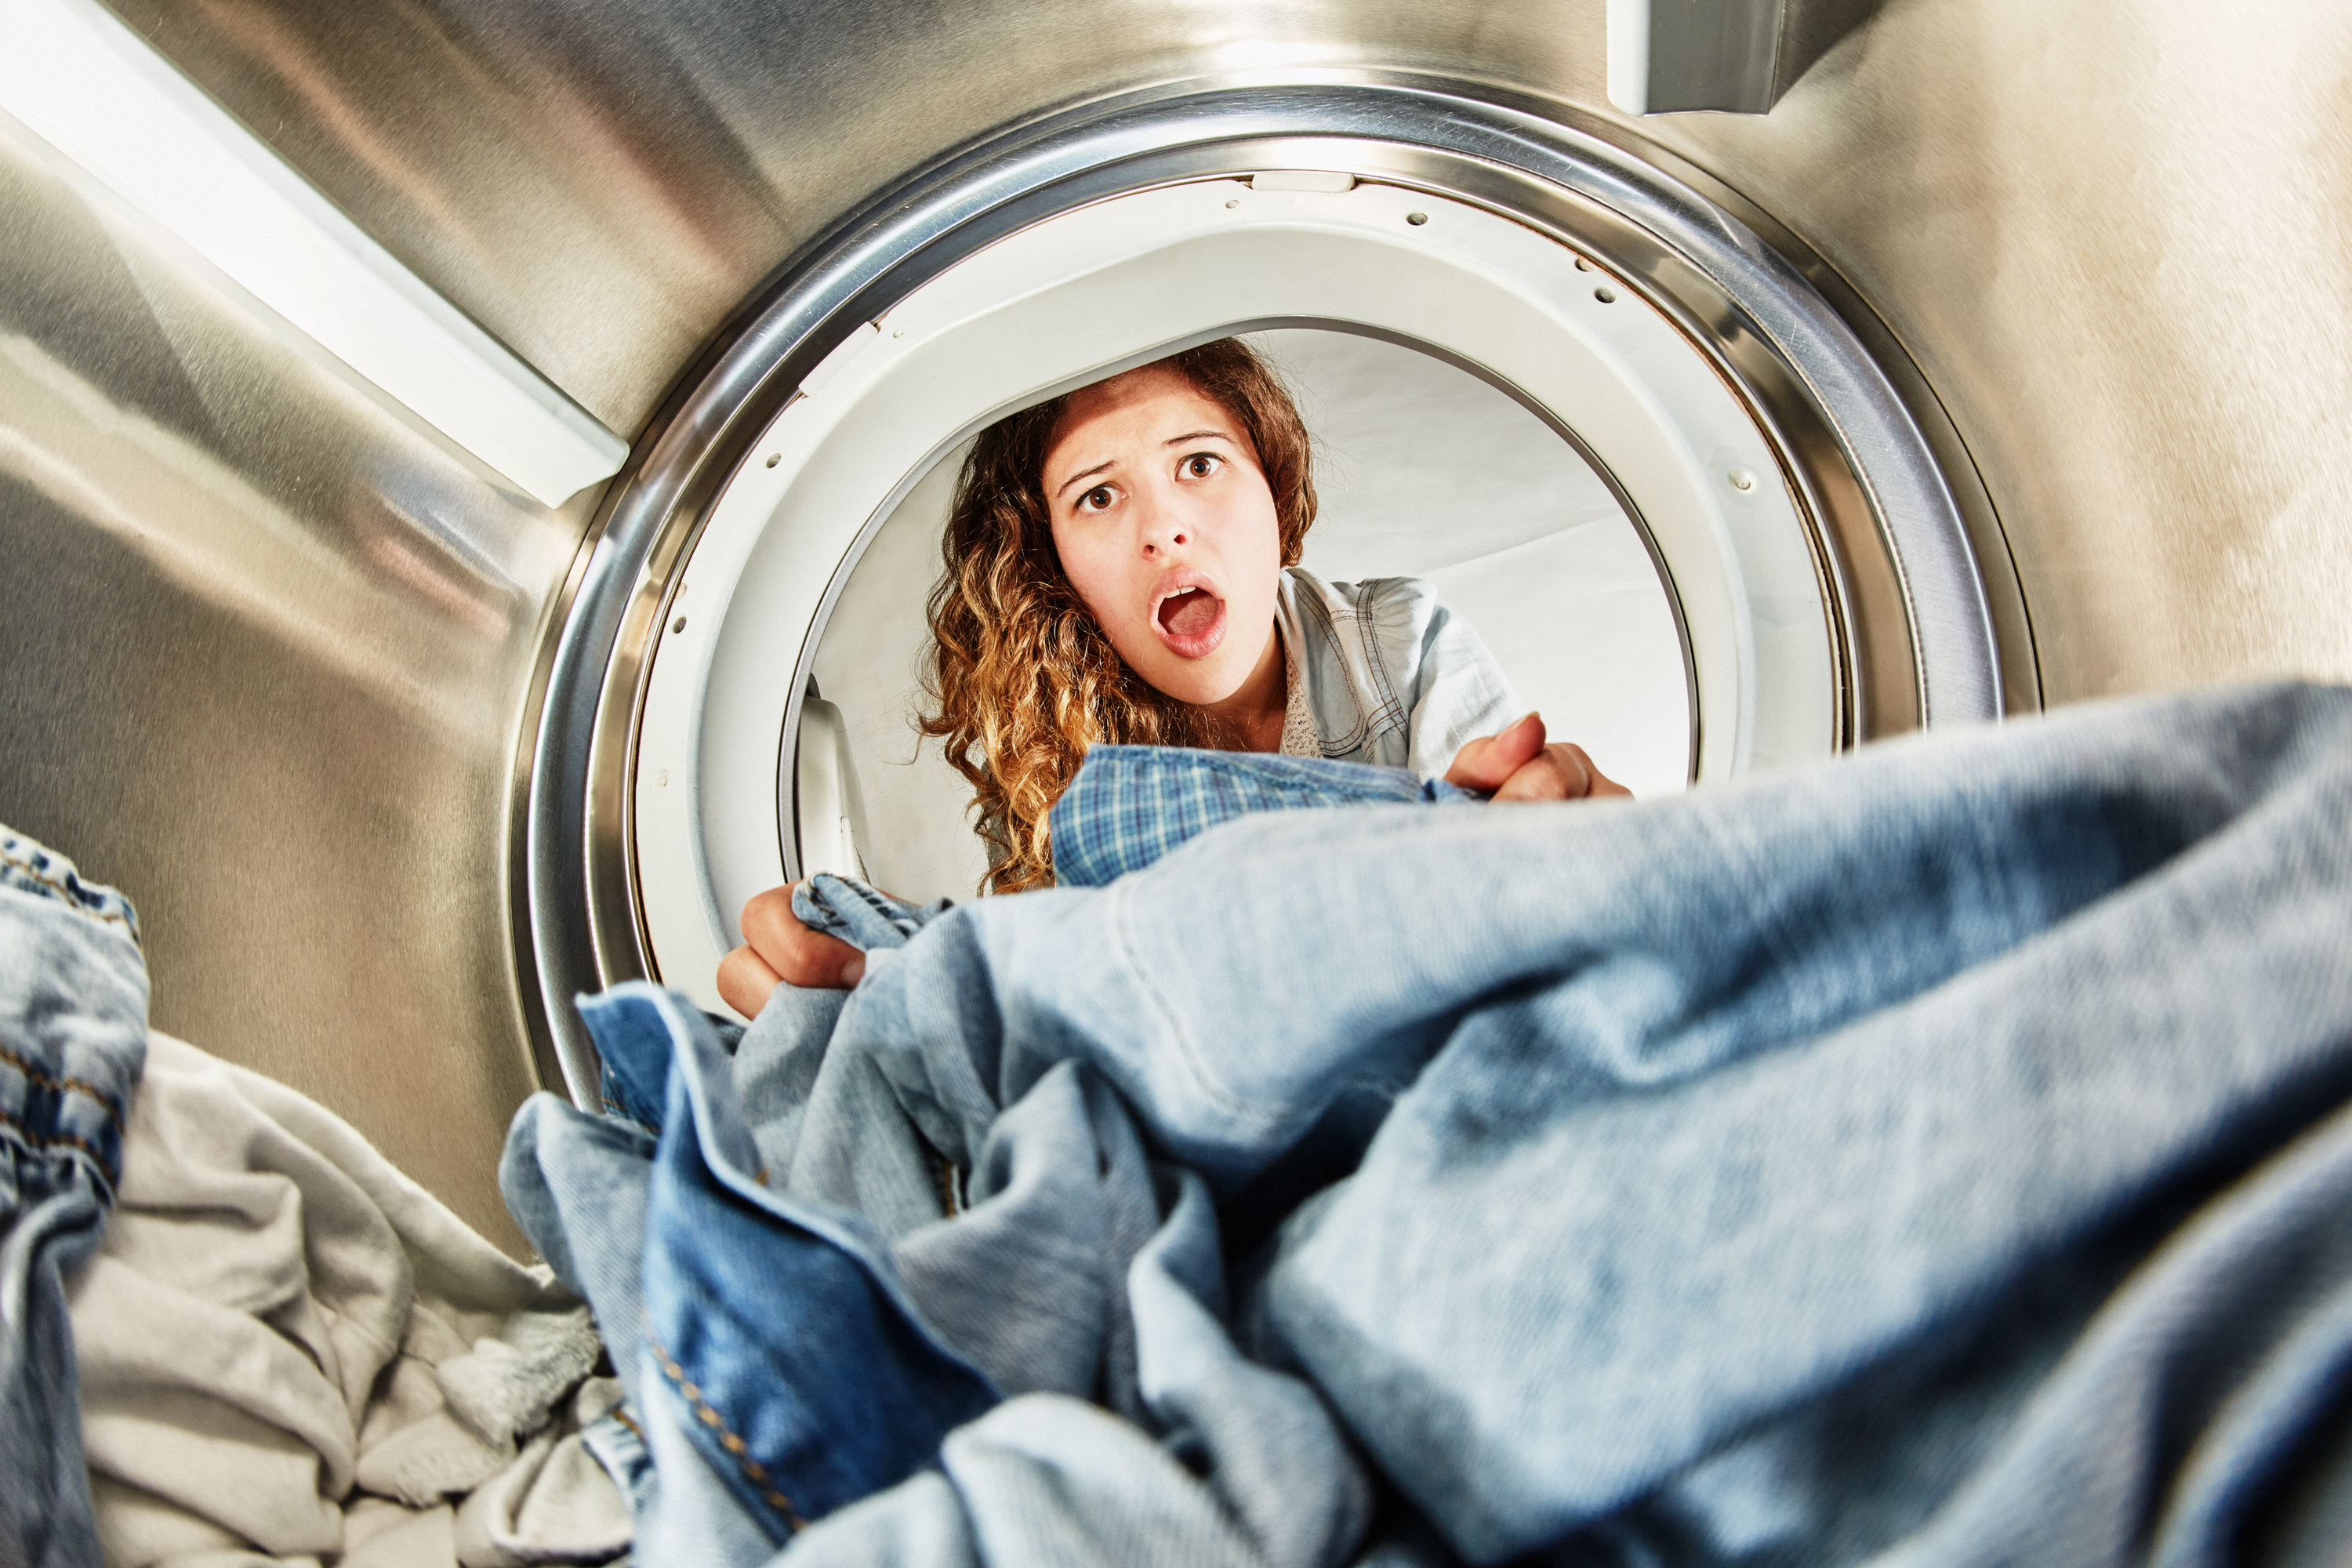 young woman with curly hair gasps open-mouthed as she checks out her newly dried clothes. Unusual angle from inside the appliance itself.